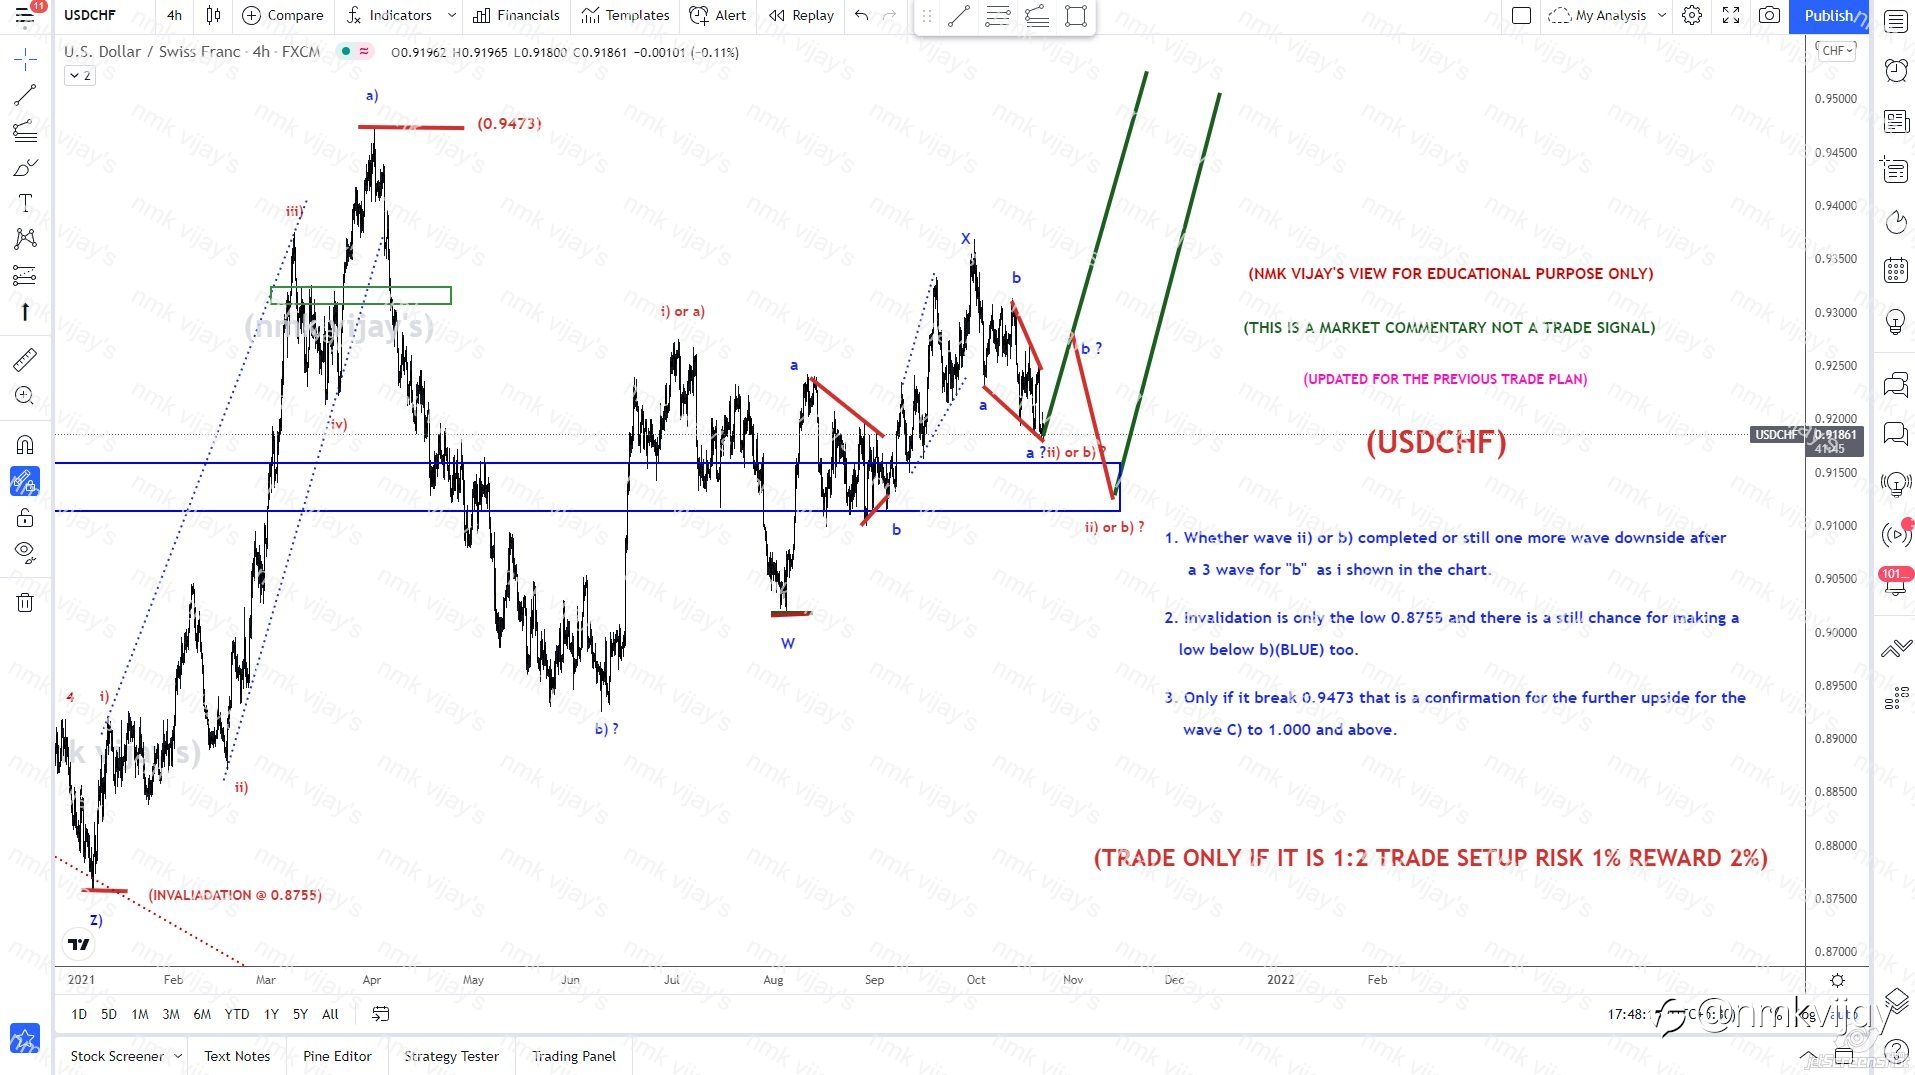 USDCHF-Wave ii) or b) completed or still one more low ?